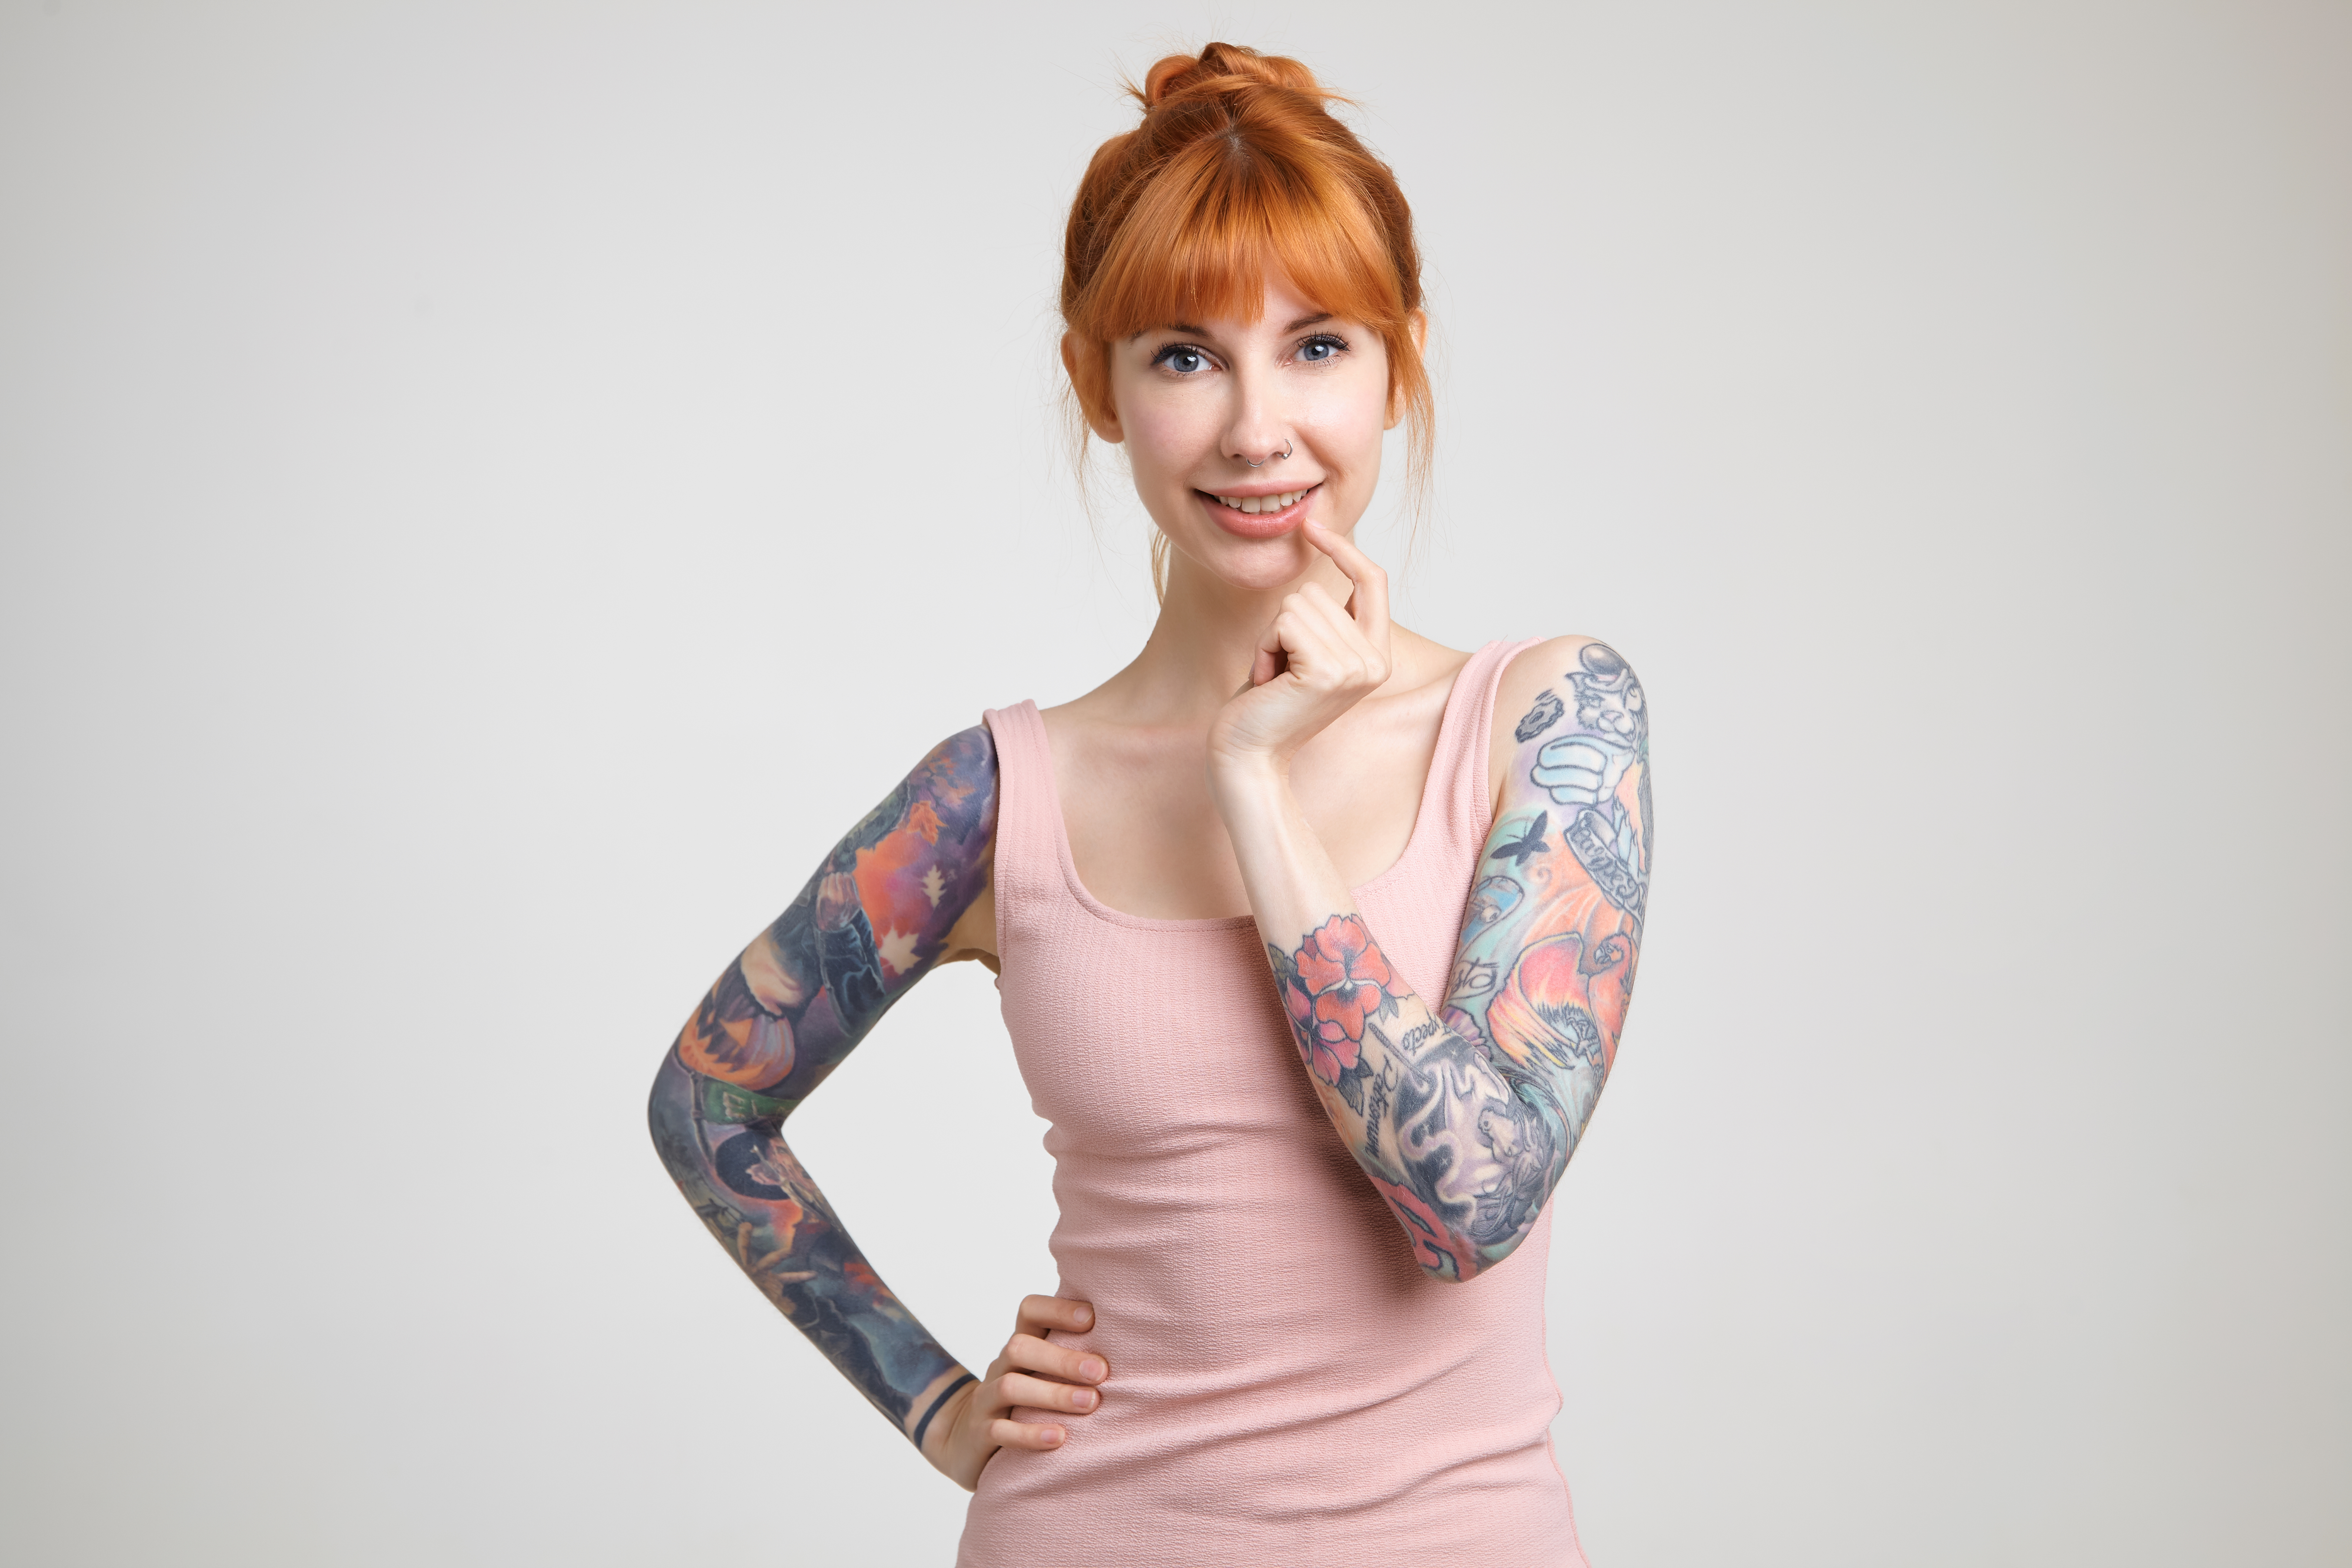 cheerful-young-lovely-redhead-tattooed-lady-with-nose-piercing-looking-positively-camera-with-charming-smile-standing-against-white-background-nude-shirt.jpg